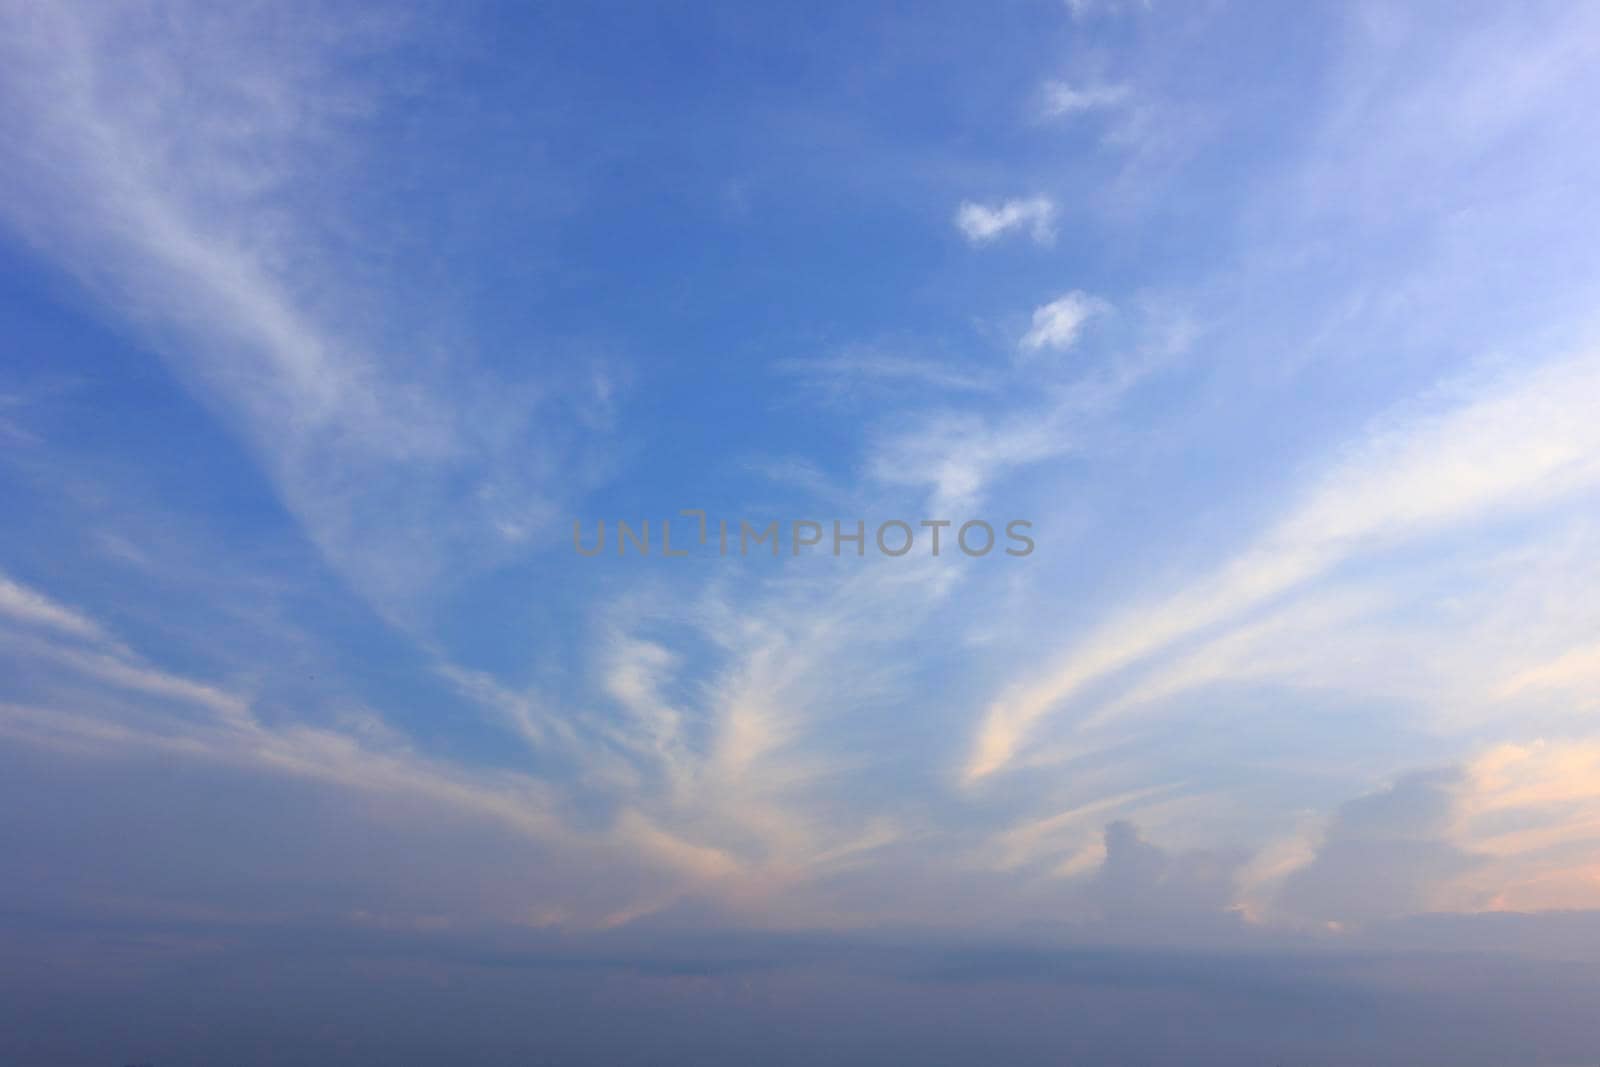 photograph of the sunrise from the sea and the beautiful sky and morning clouds